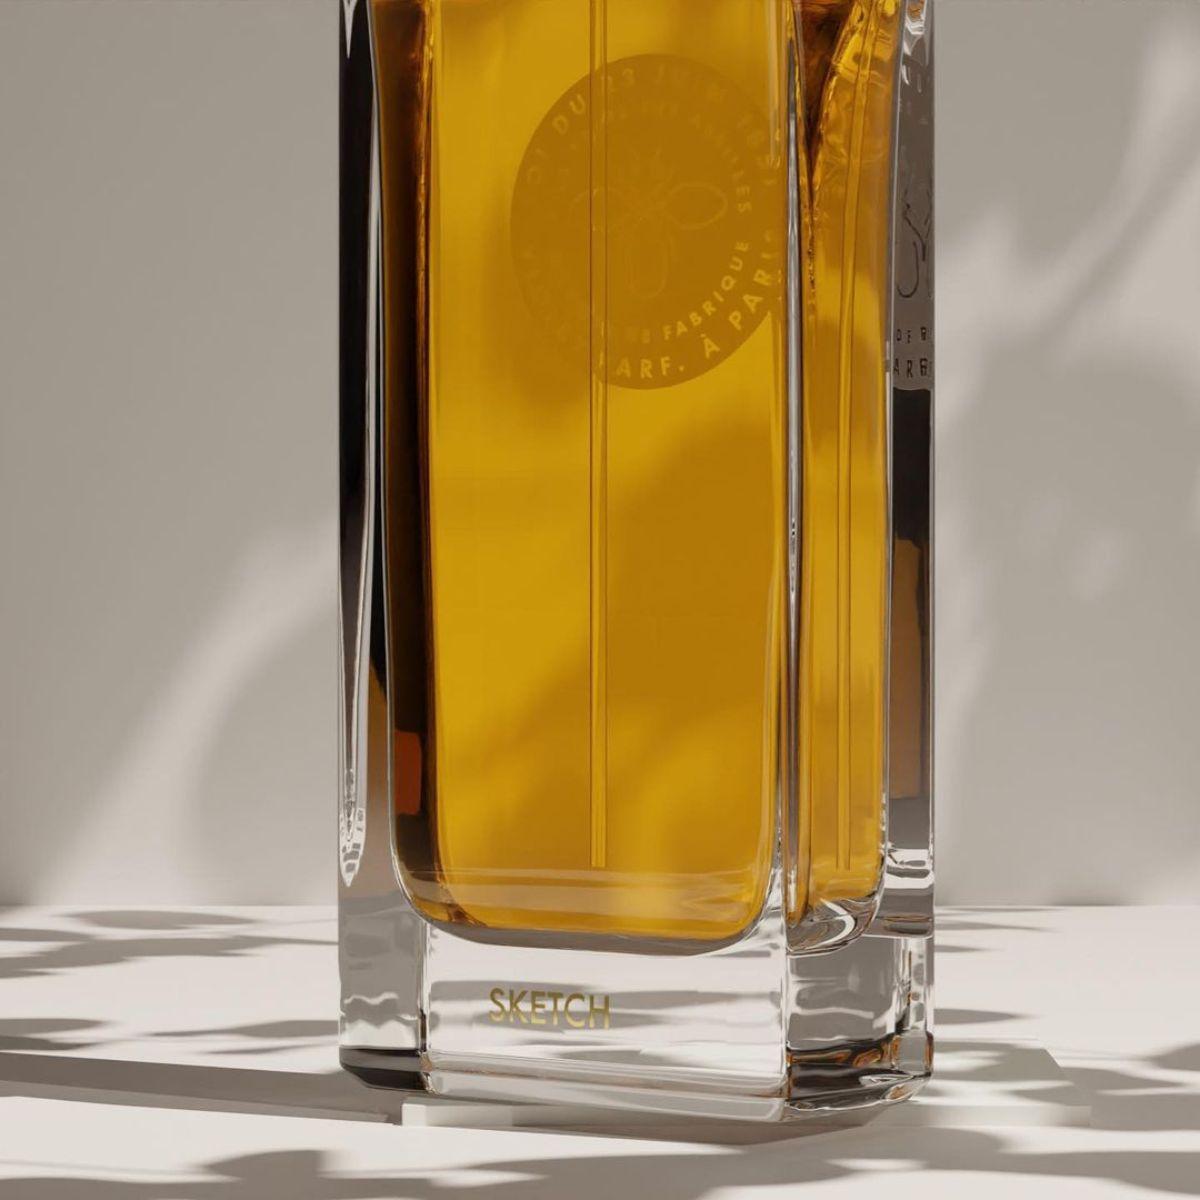 Image of Sketch 75 ml by the perfume brand Violet